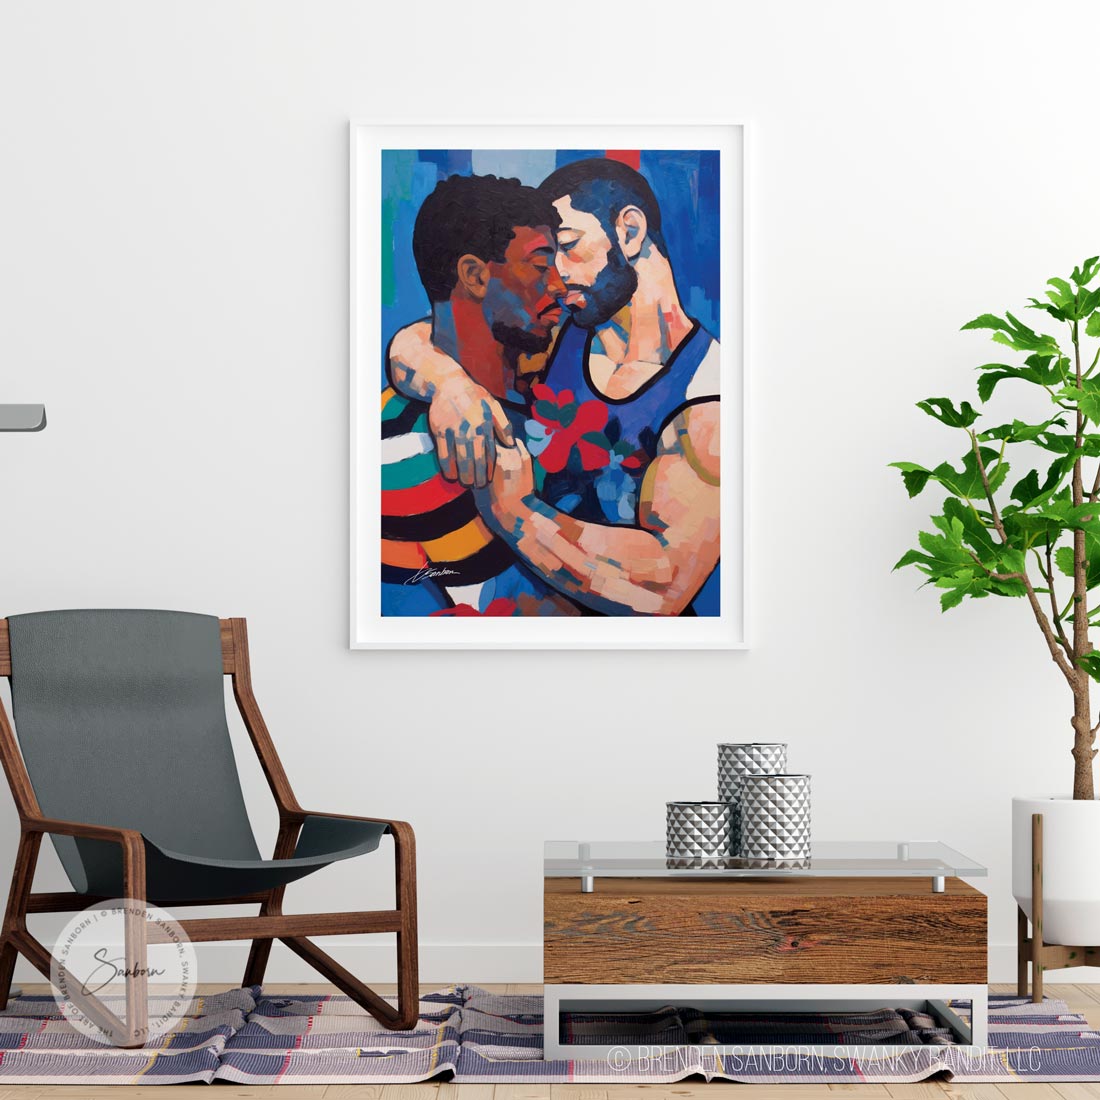 Embrace of Passion: Intimate Gay Lovers with Thick Beards and Embracing Arms - Giclee Art Print